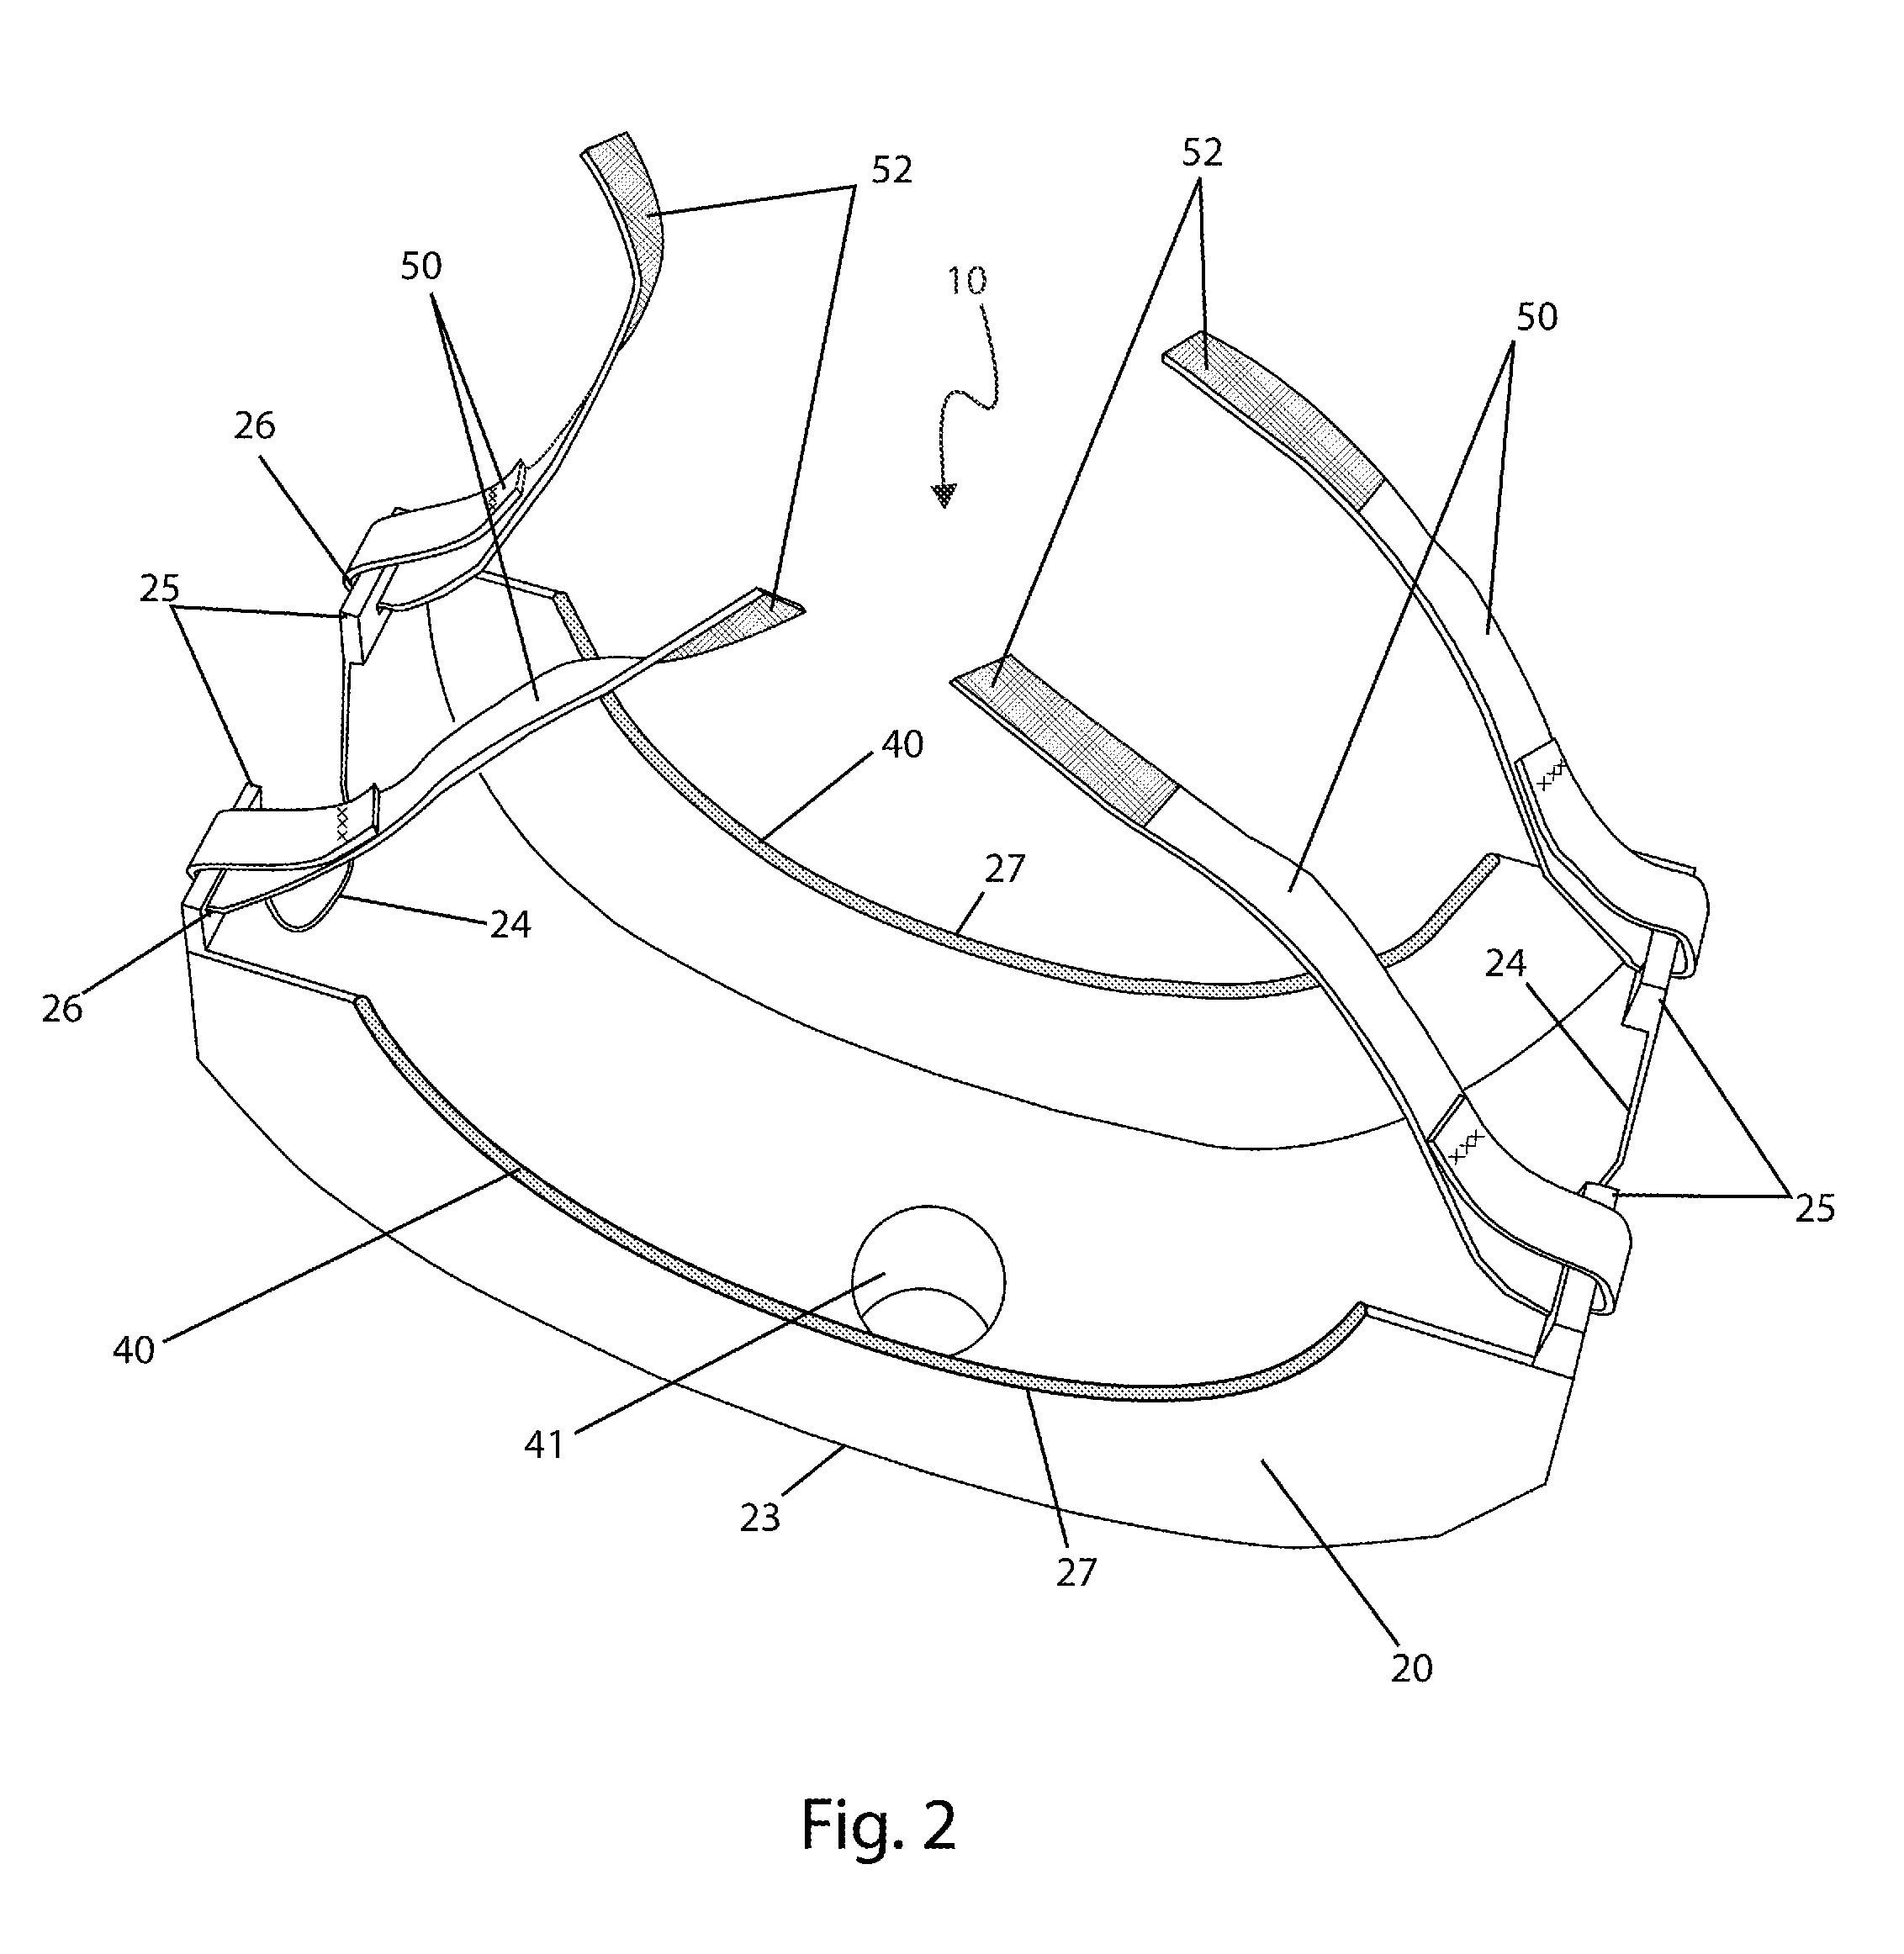 Attachable drain collar for plumbing system couplings